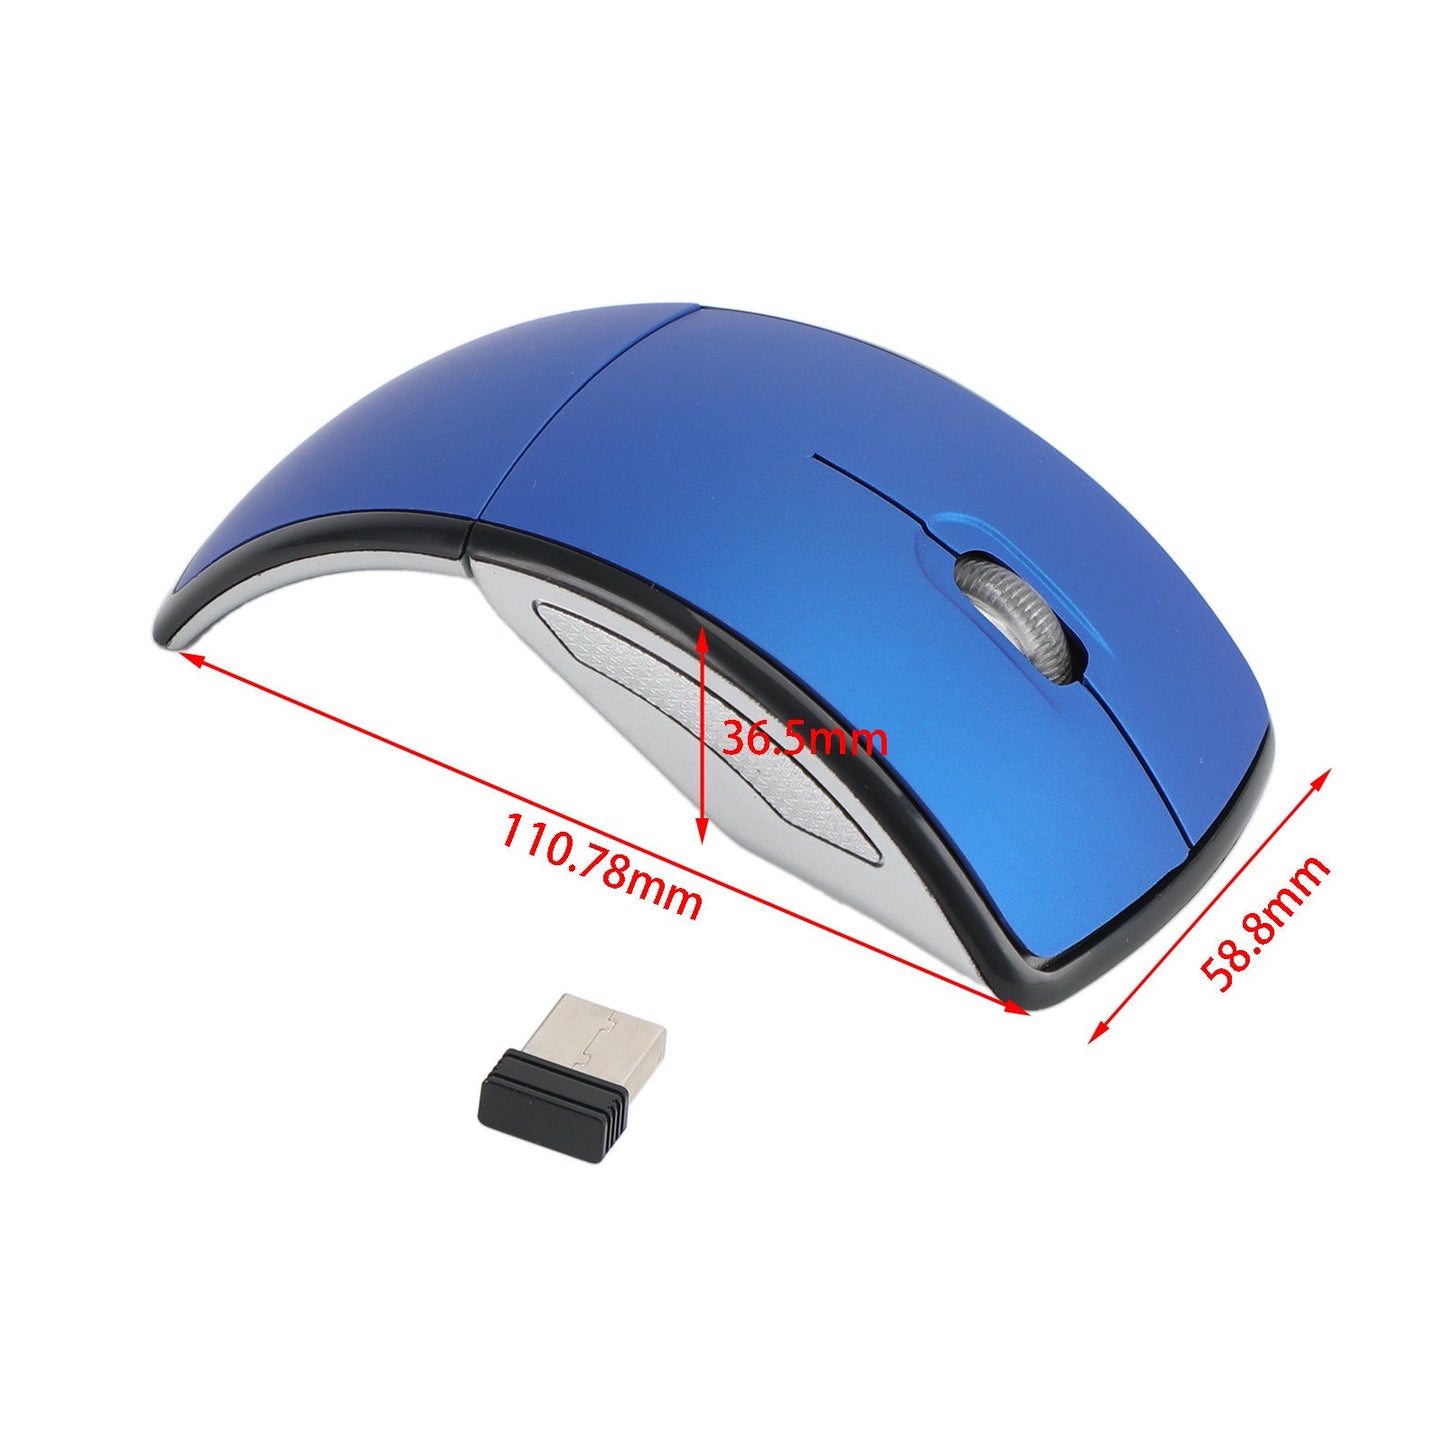 2.4Ghz Wireless Foldable Folding Arc Optical Mouse for Laptop Notebook Black